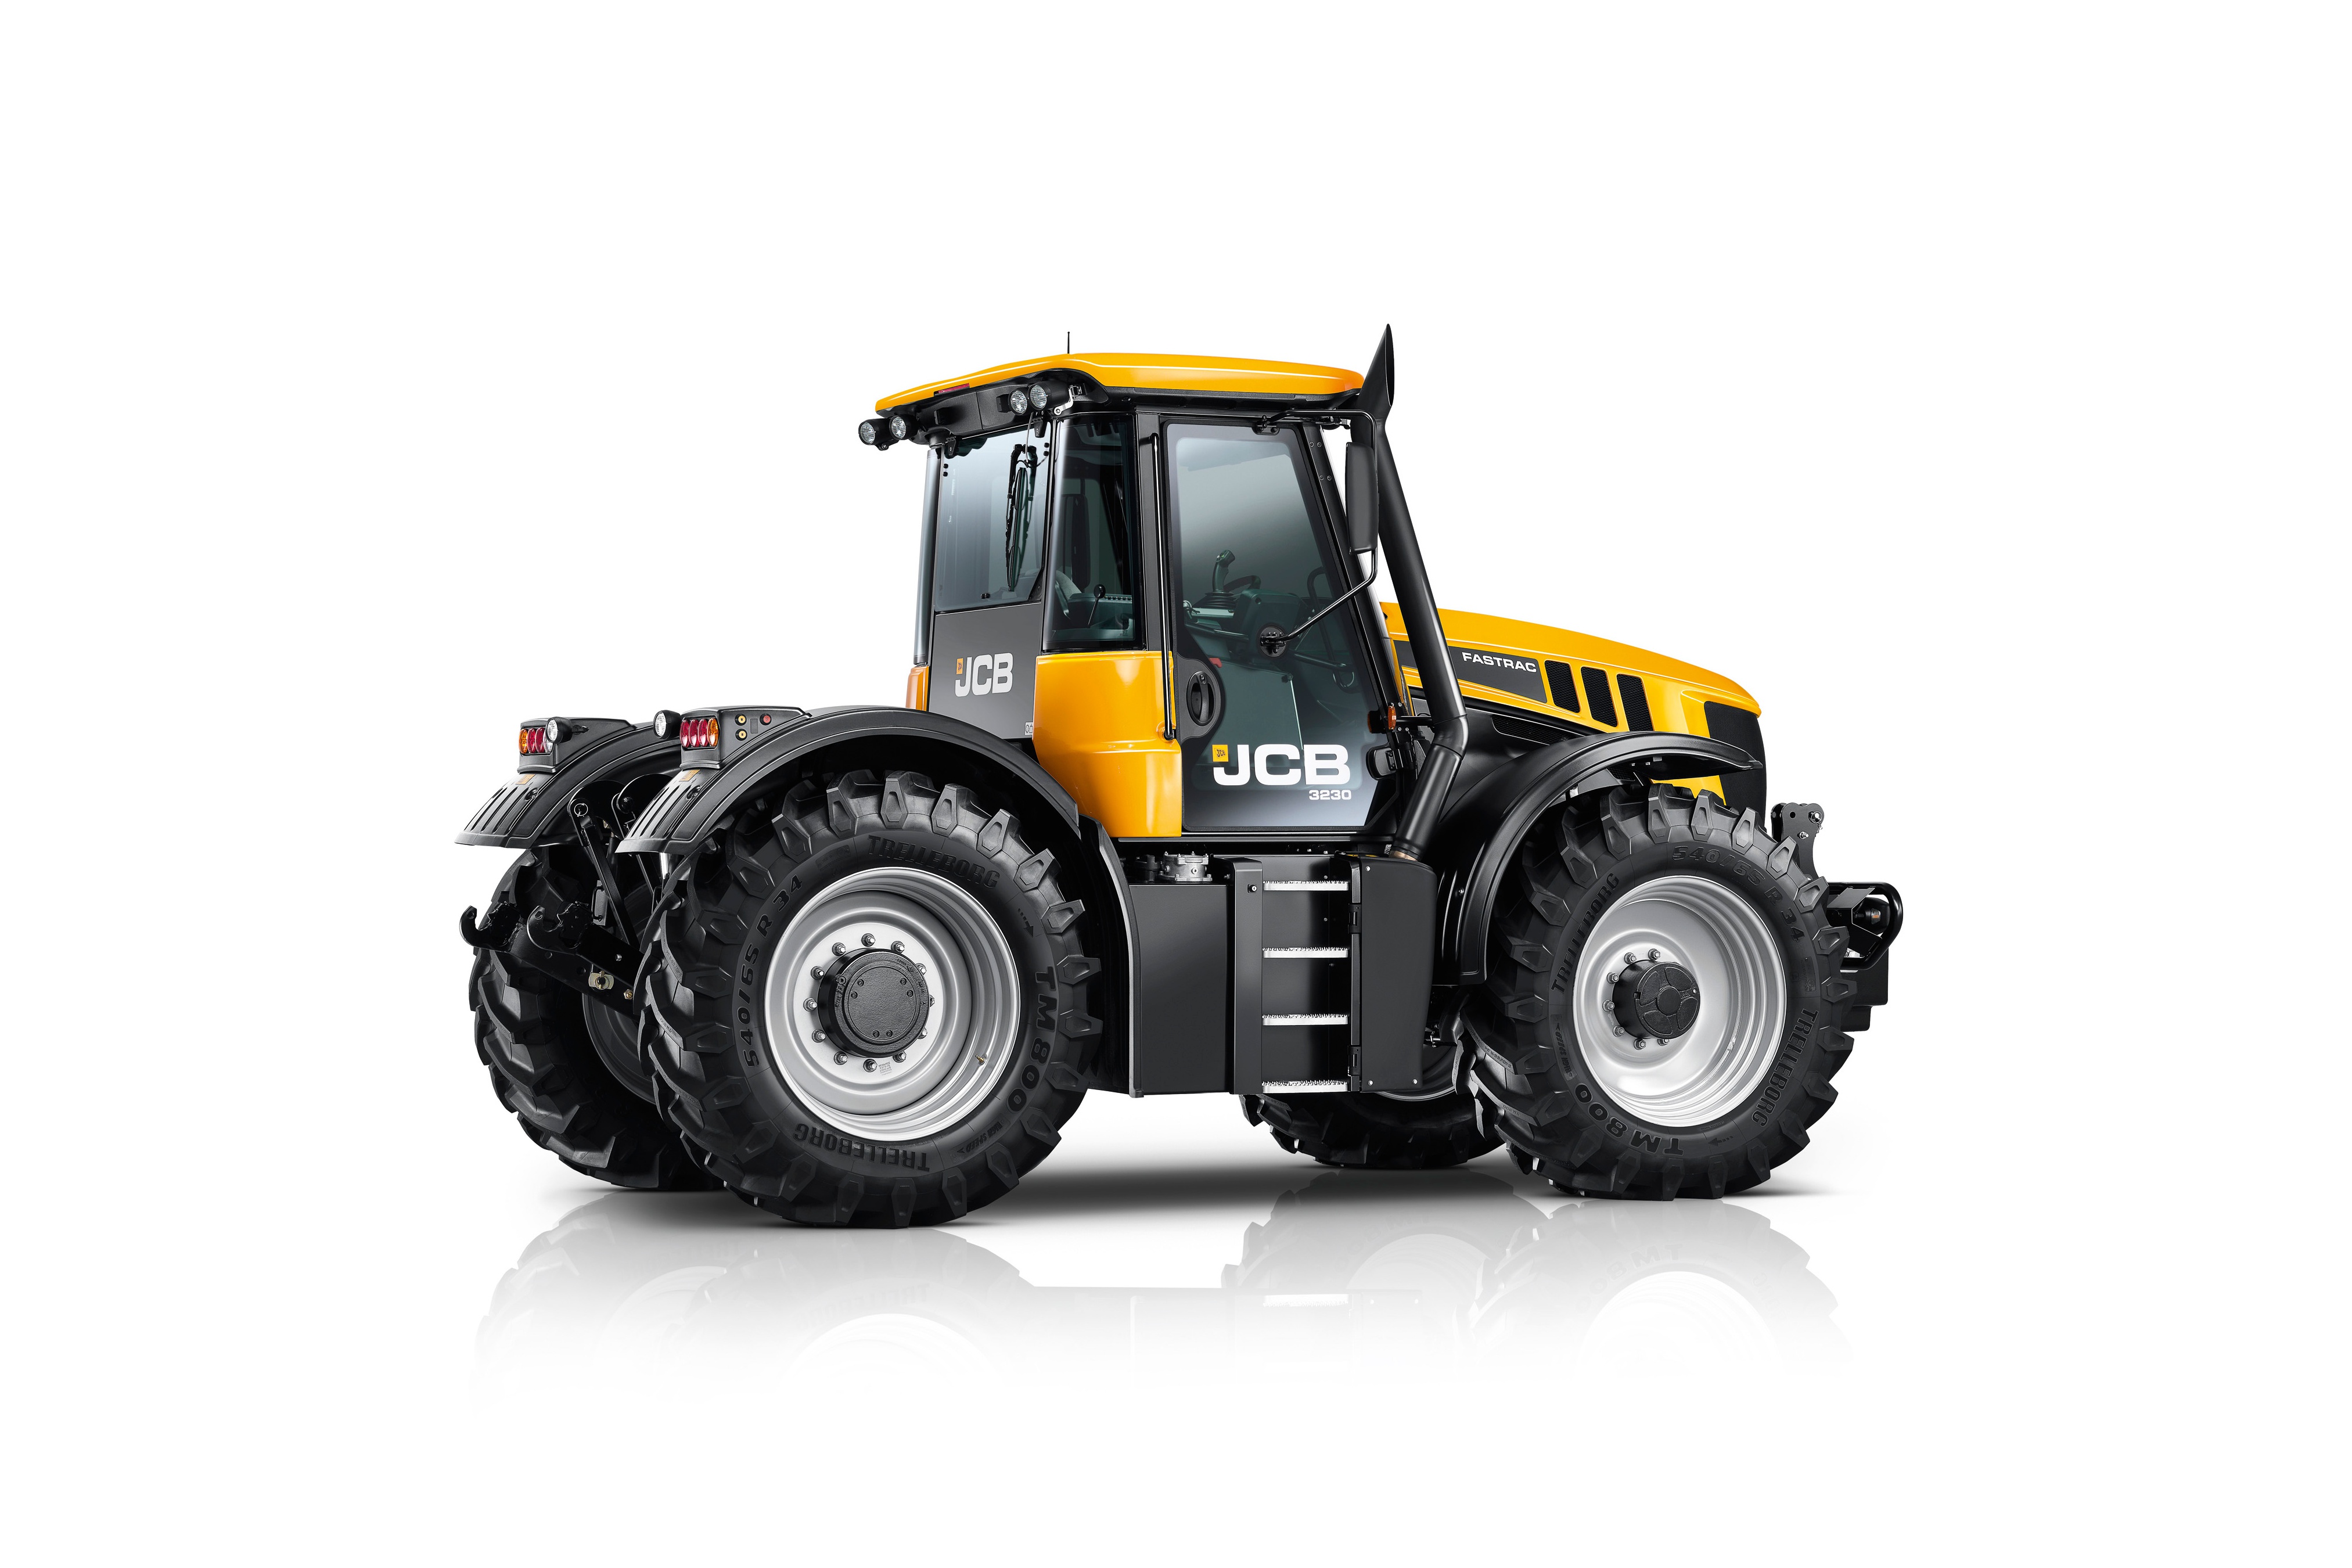 General 4050x2700 simple background vehicle tractors Fastrac 3230